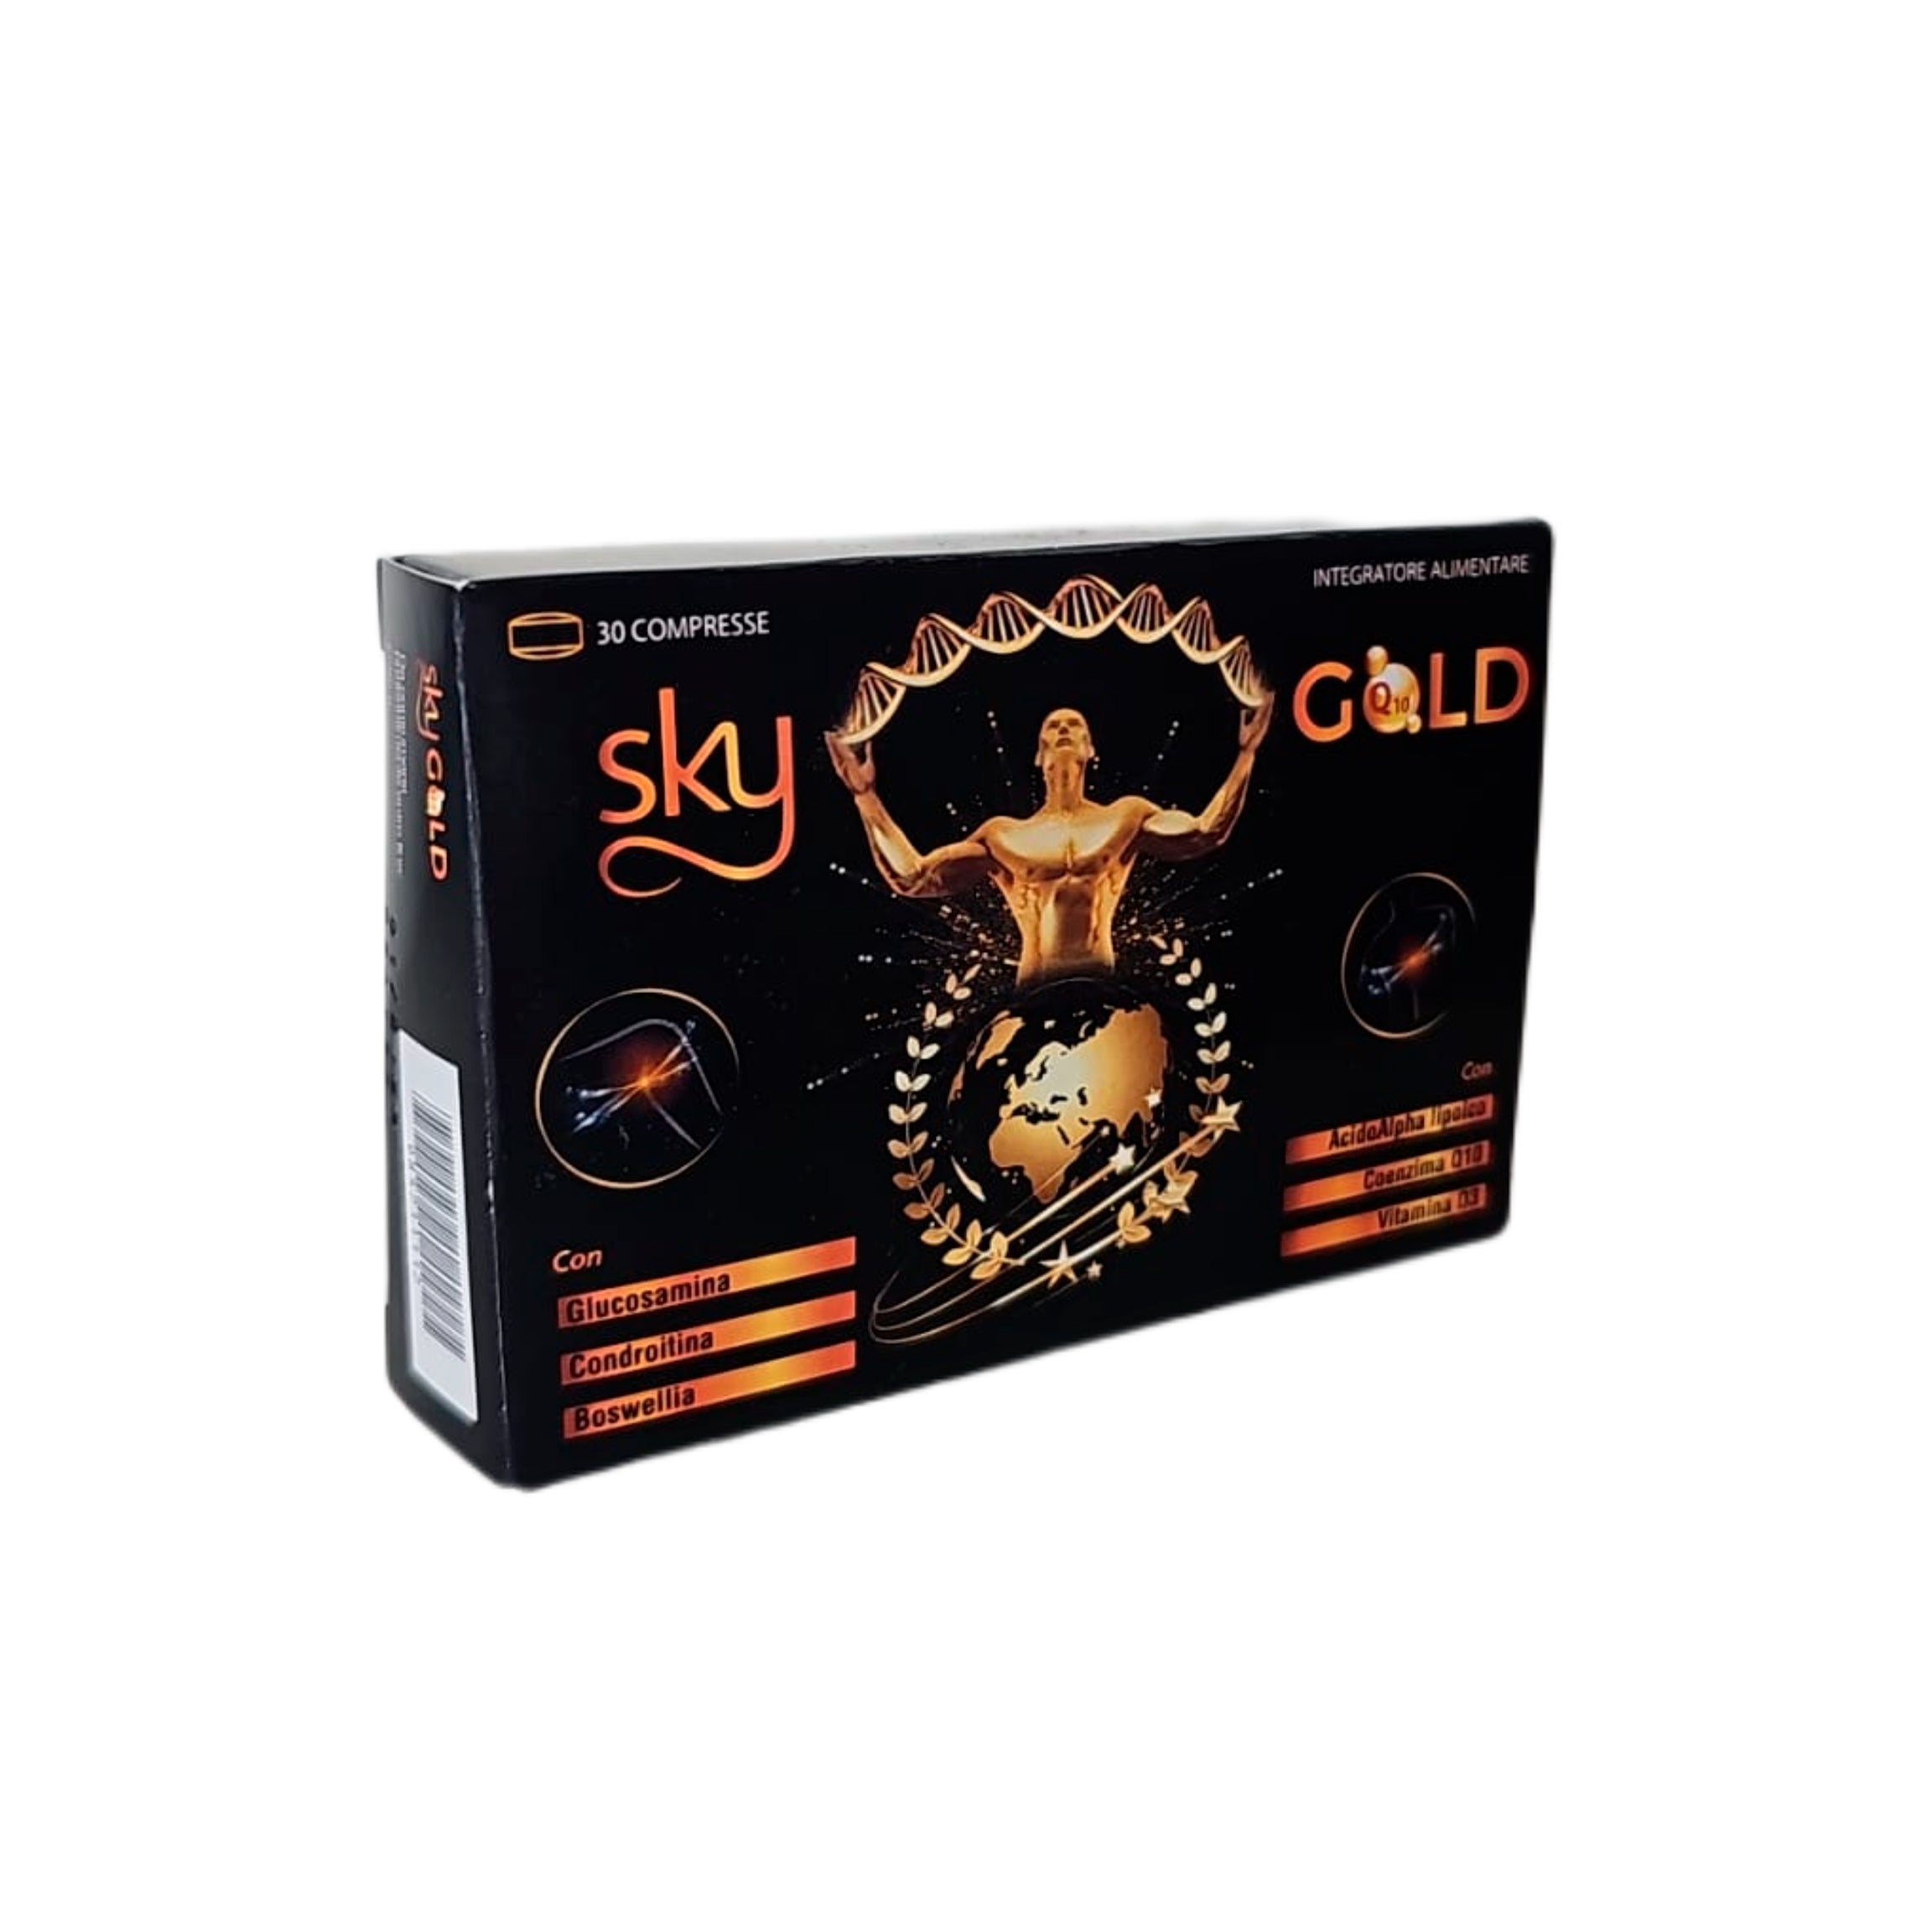 SkyGOLD